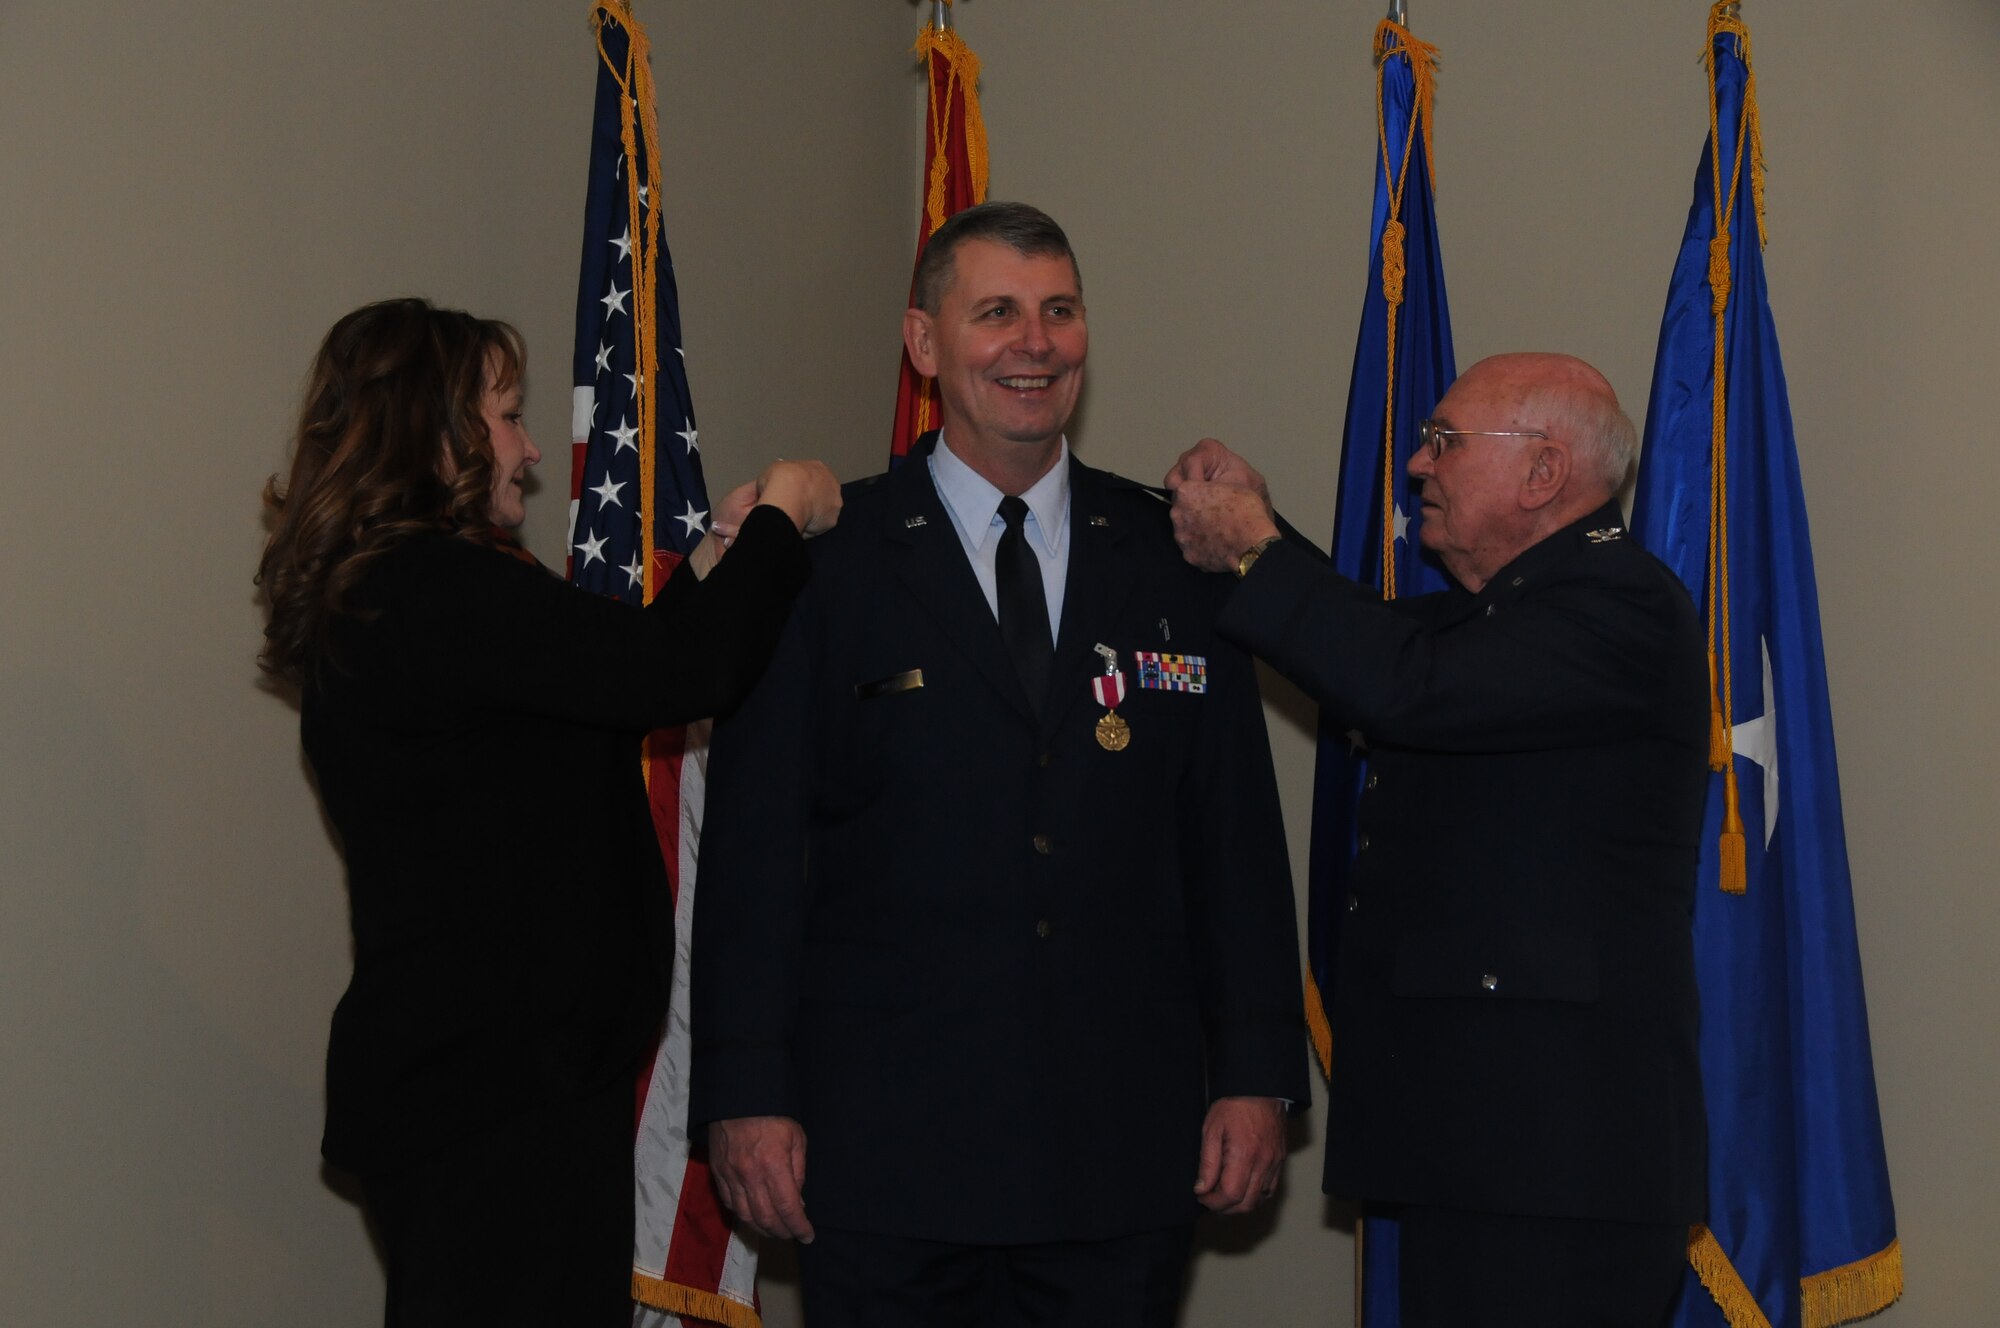 Chaplain Tom Smith was promoted to the rank of colonel, March 7, 2015, during a formal pinning ceremony presided by Brig. Gen. (ret) H. D. McCarty held at Ebbing Air National Guard Base, Fort Smith, Ark. Smith served as a chaplain for more than 30 years and recently assumed the position of Joint Force Headquarters Command chaplain for the state of Arkansas. (U.S. Air National Guard photo by Senior Airman Cody Martin/released)